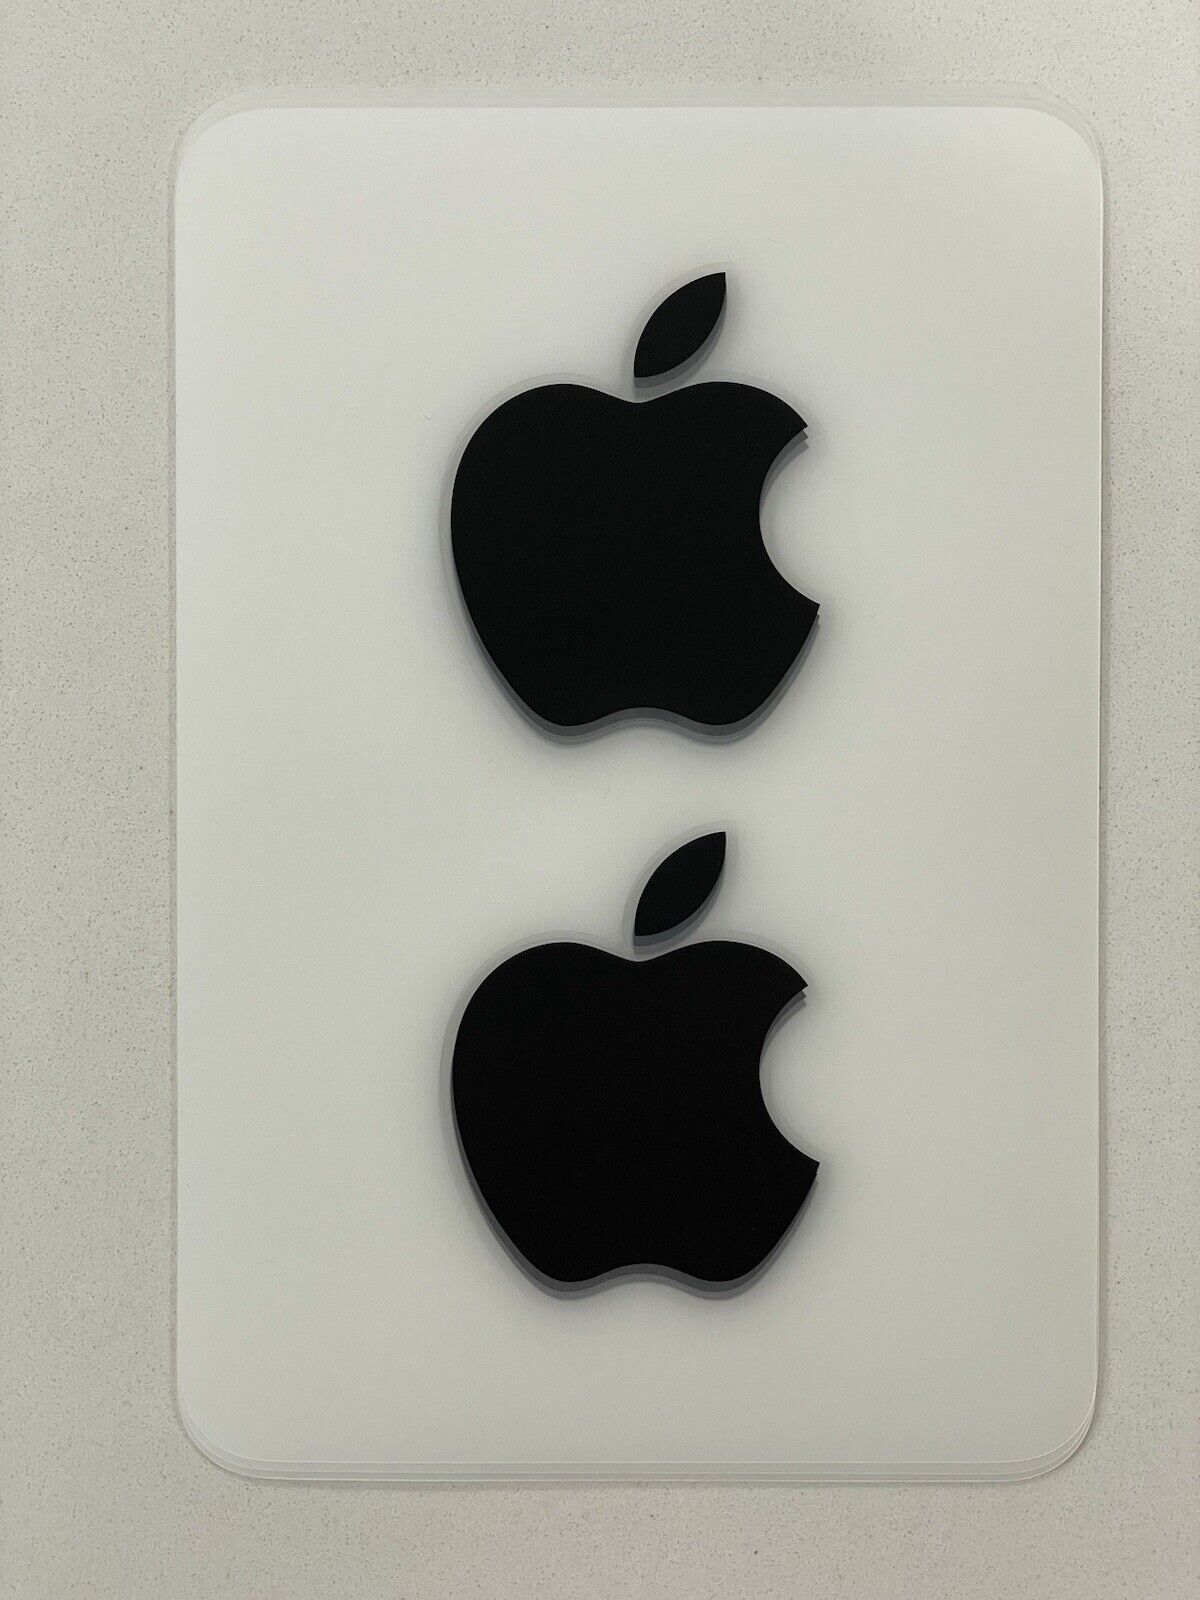 NEW Black Apple Logo Sticker Decal - Genuine OEM - Includes 2 Stickers - Large